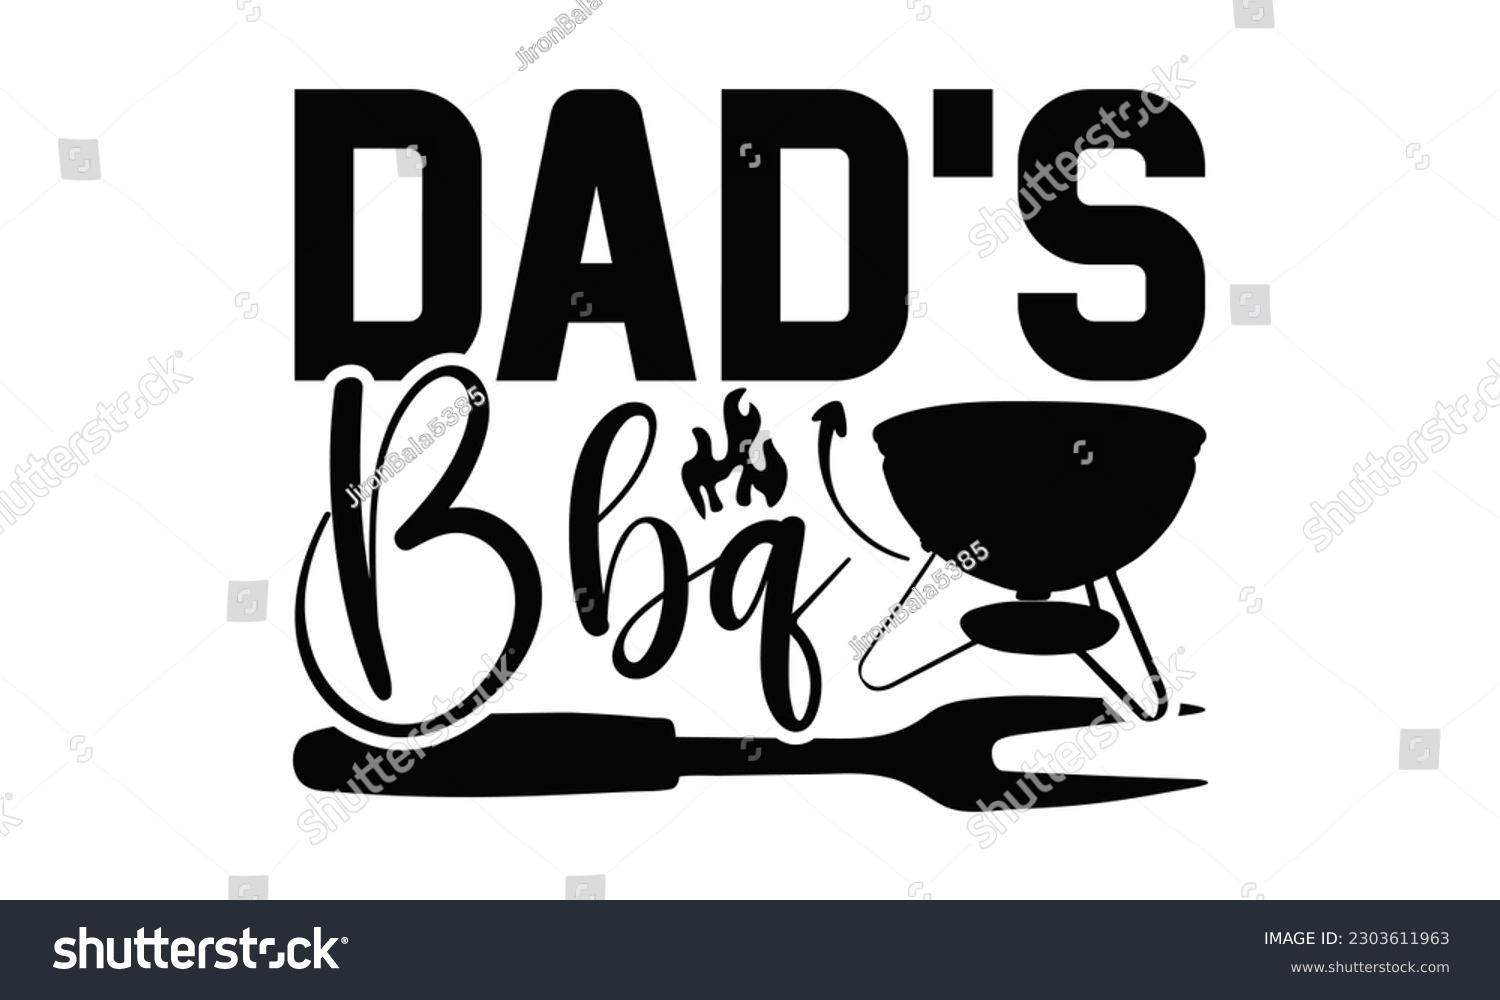 SVG of Dad’s Bbq - Barbecue SVG Design, Isolated on white background, Illustration for prints on t-shirts, bags, posters, cards and Mug.
 svg